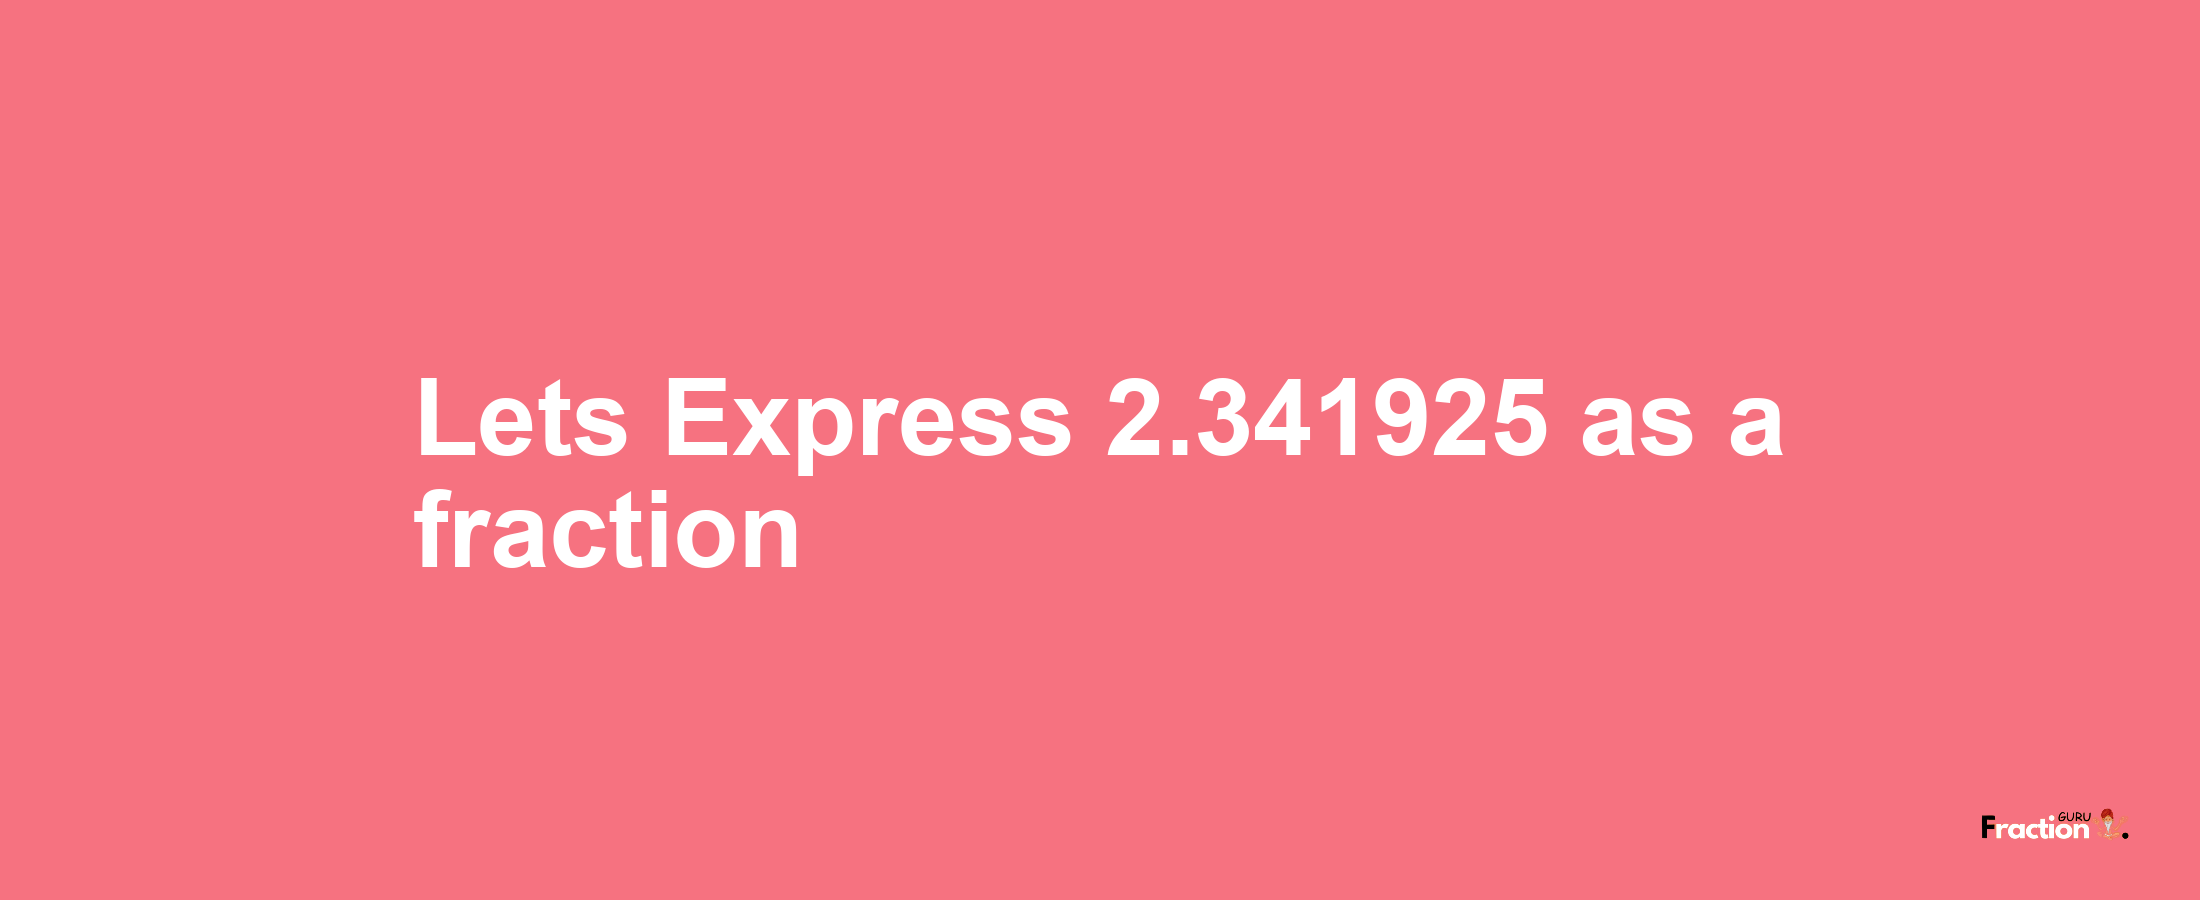 Lets Express 2.341925 as afraction